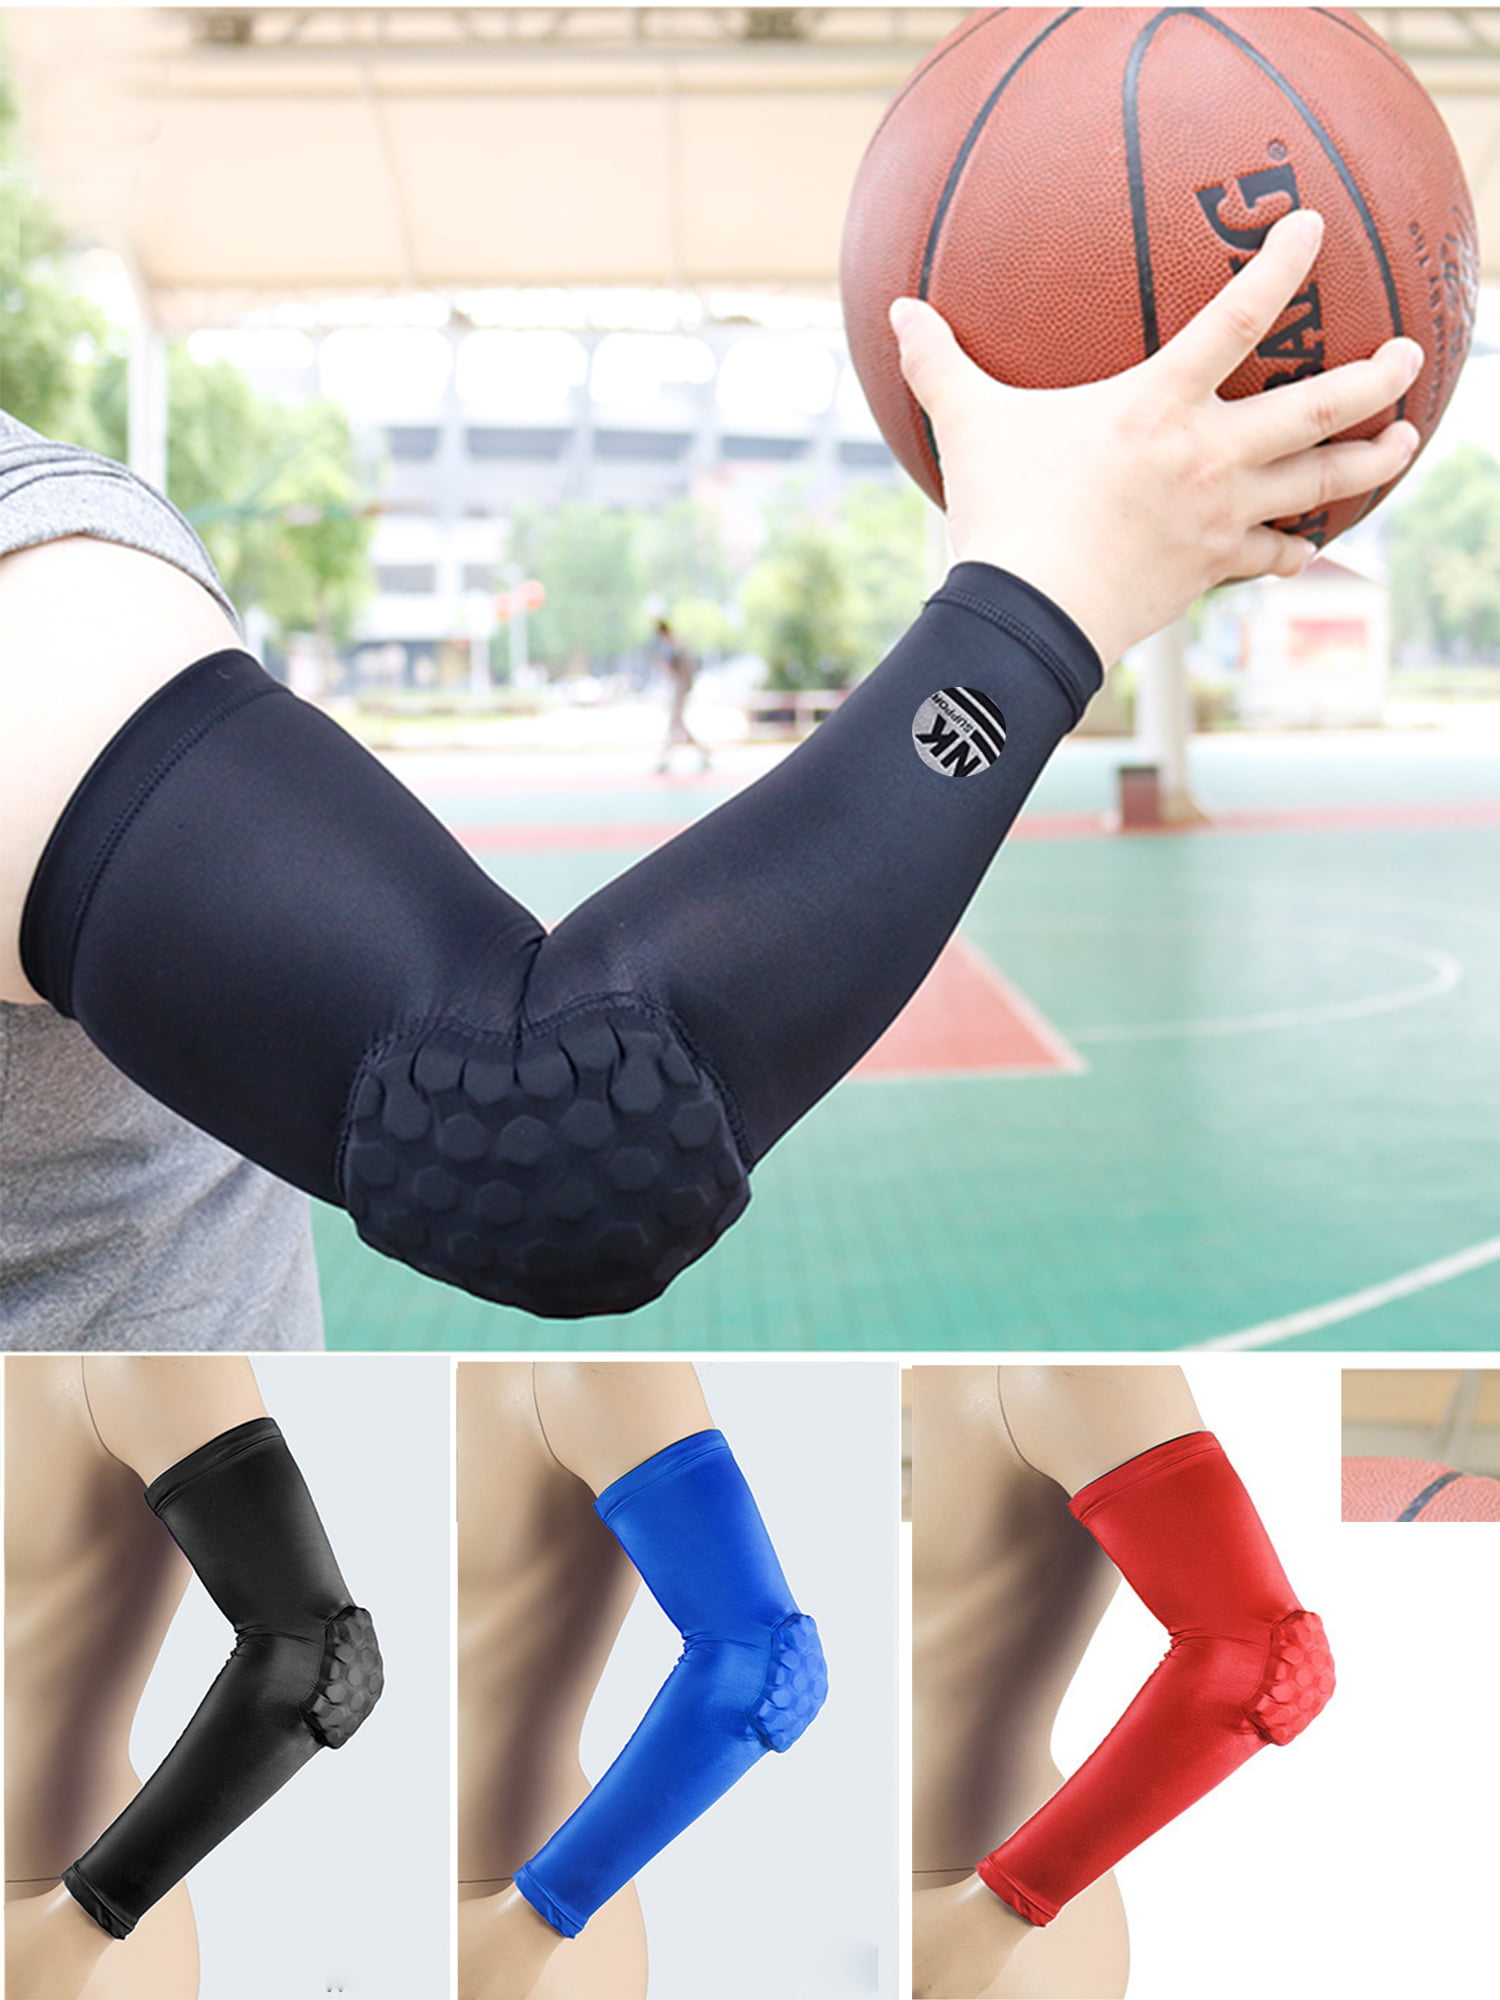 Long Sleeve Guard Protector Cotton Compression Arm 1 Pair Sports,Basketball,Bike 